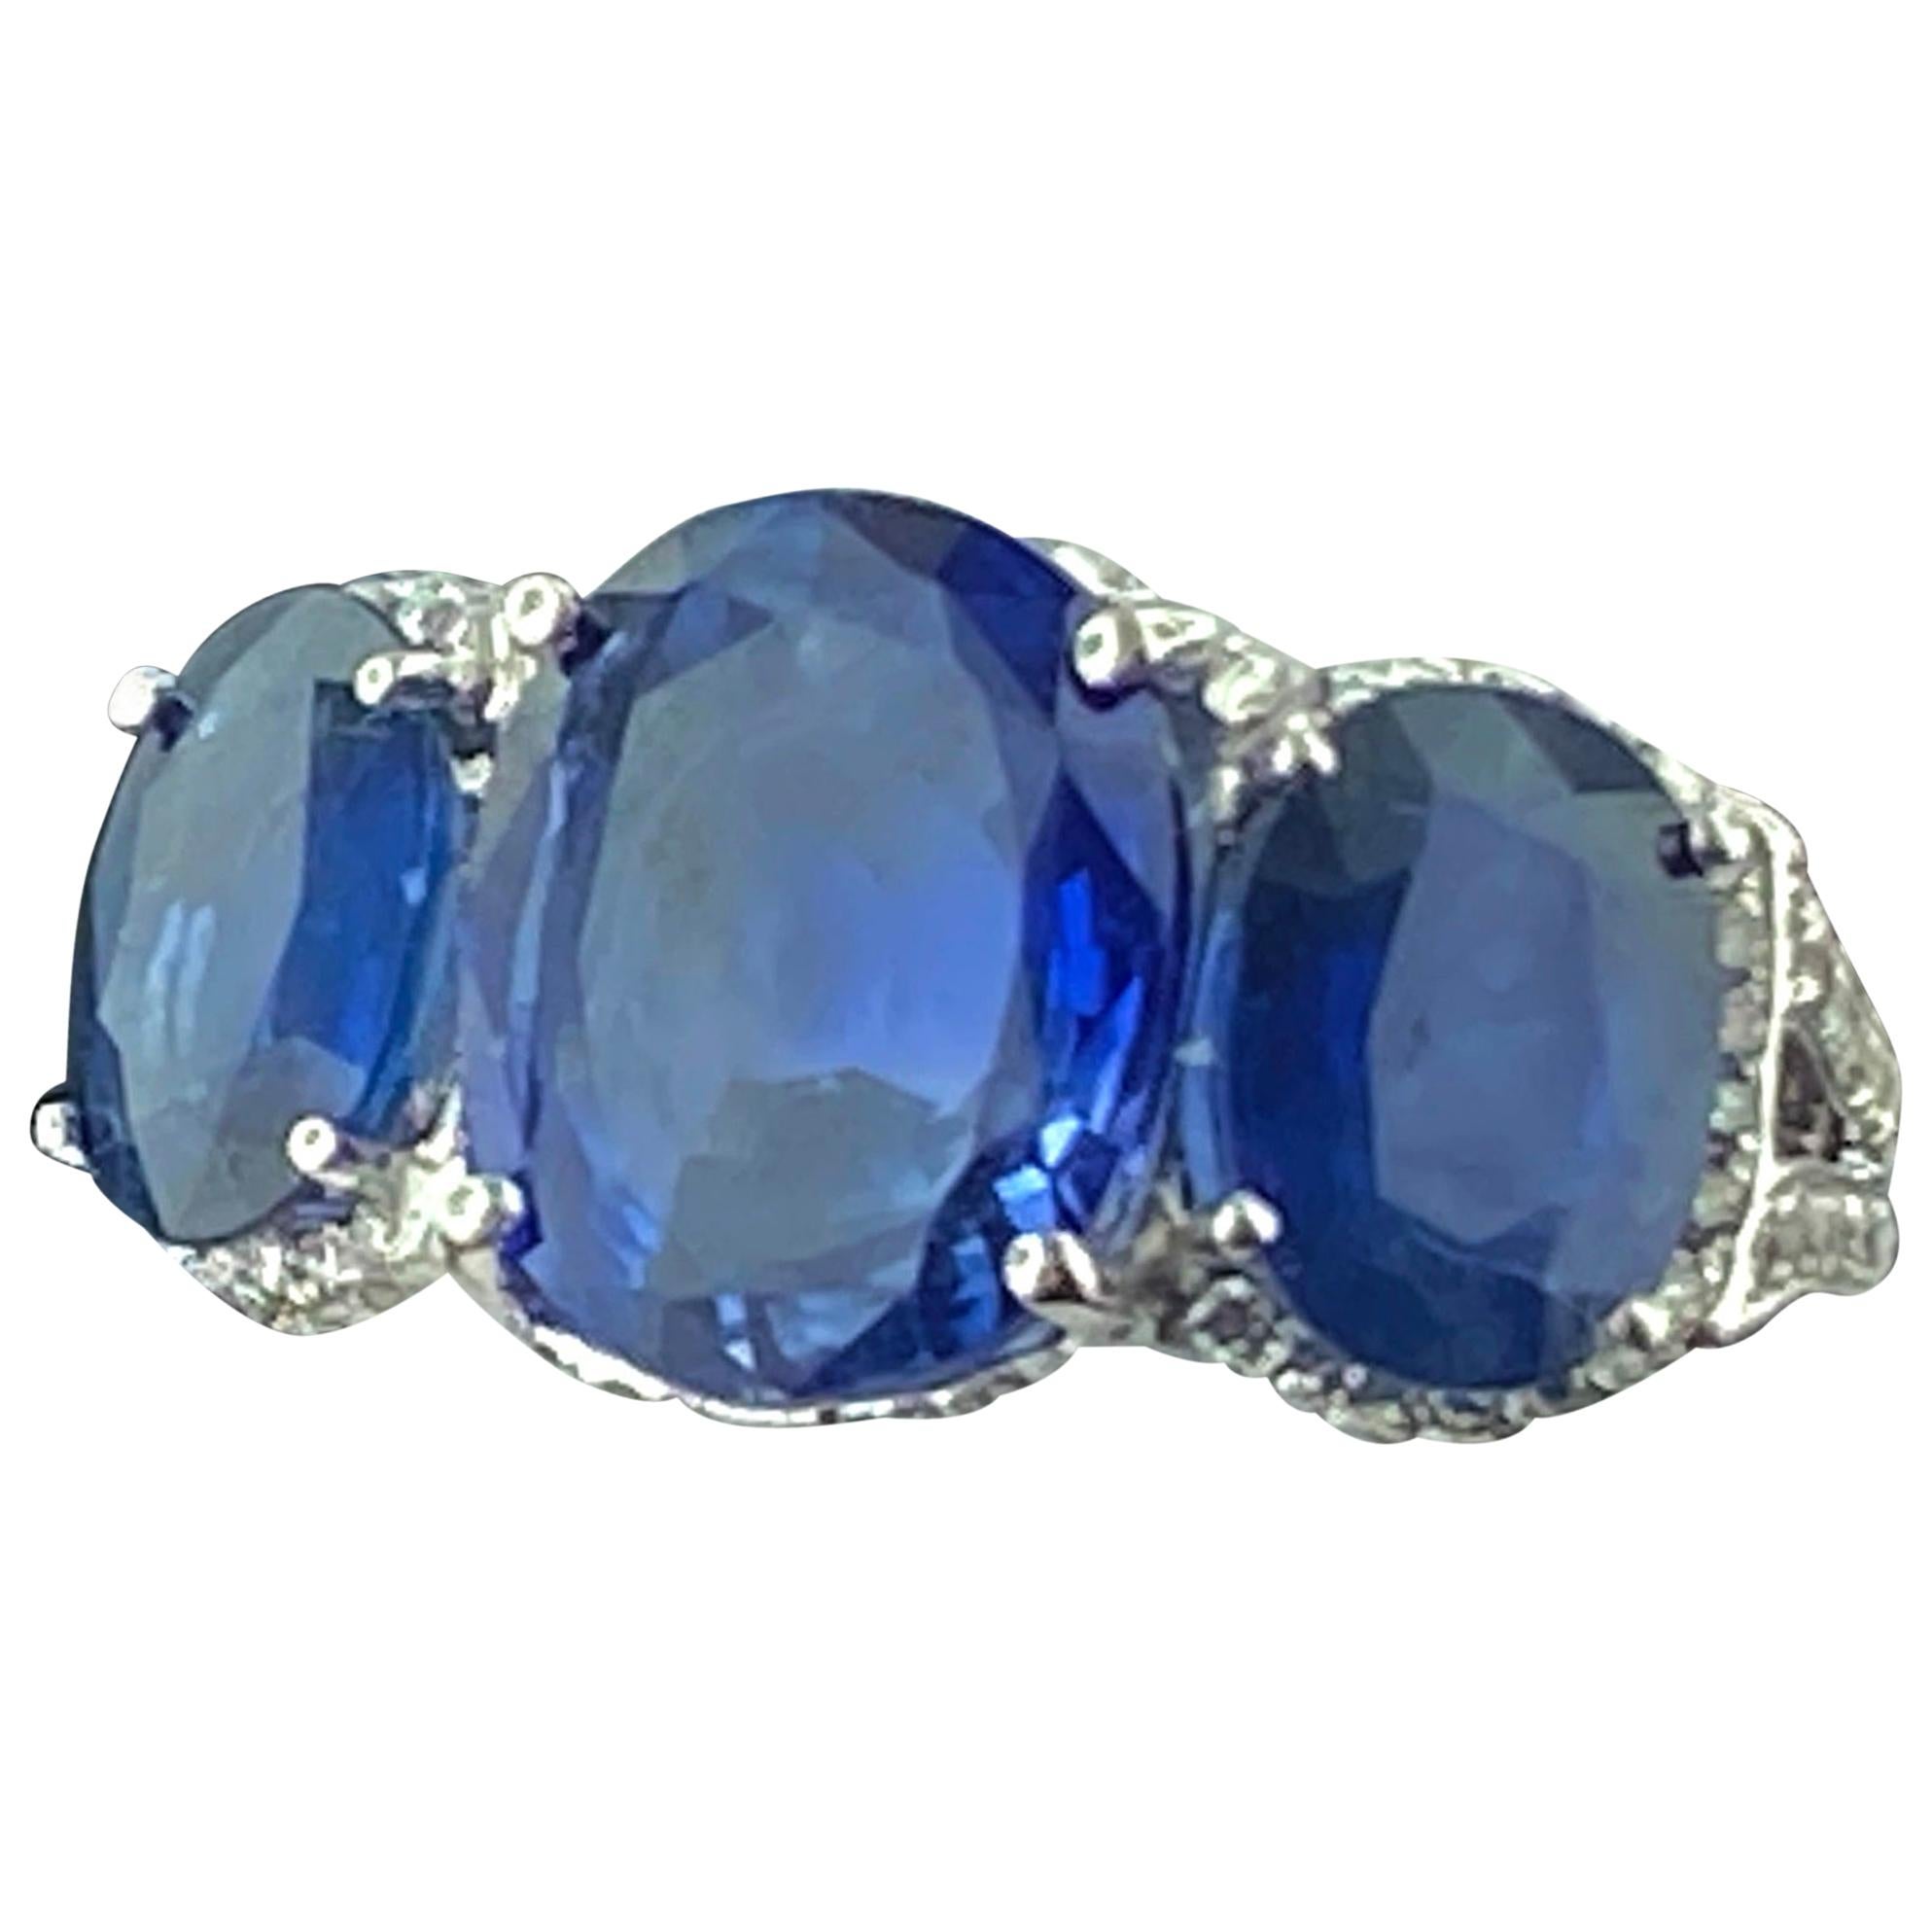 Platinum Ring with 3 Large Oval Cut Blue Sapphires and Diamonds